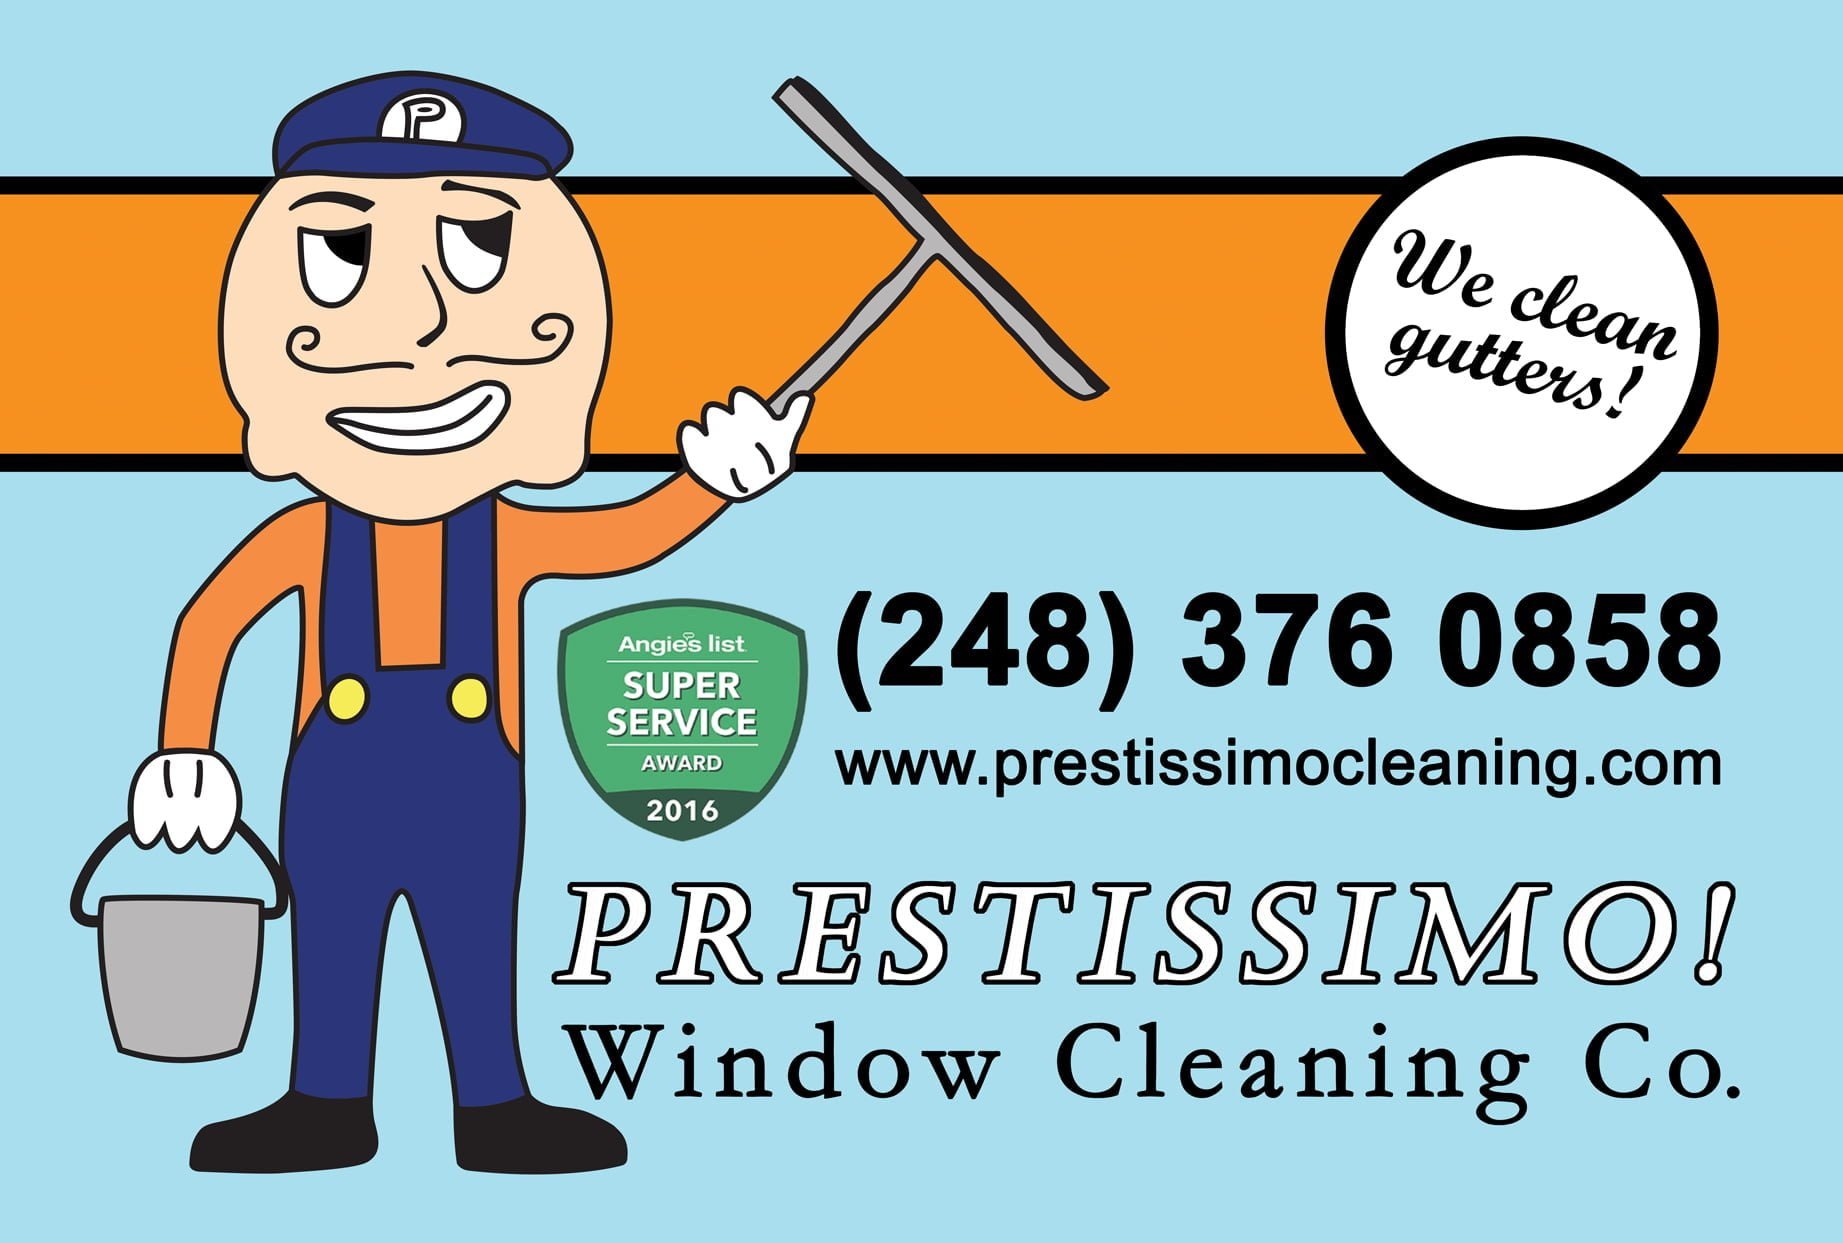 Prestissimo Window Cleaning Company Window Cleaning Company